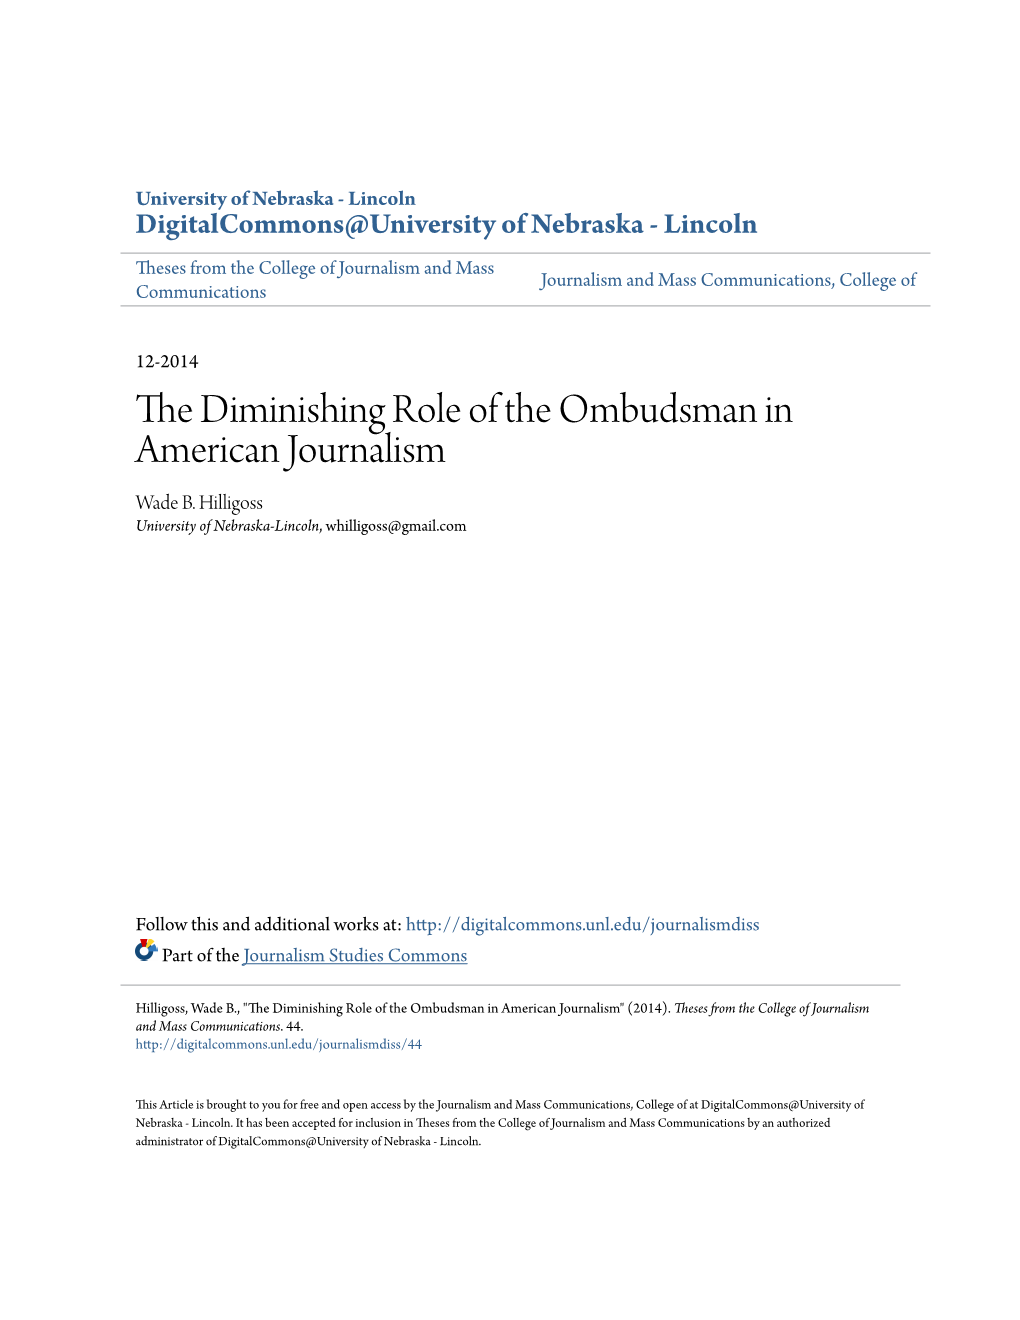 The Diminishing Role of the Ombudsman in American Journalism Wade B